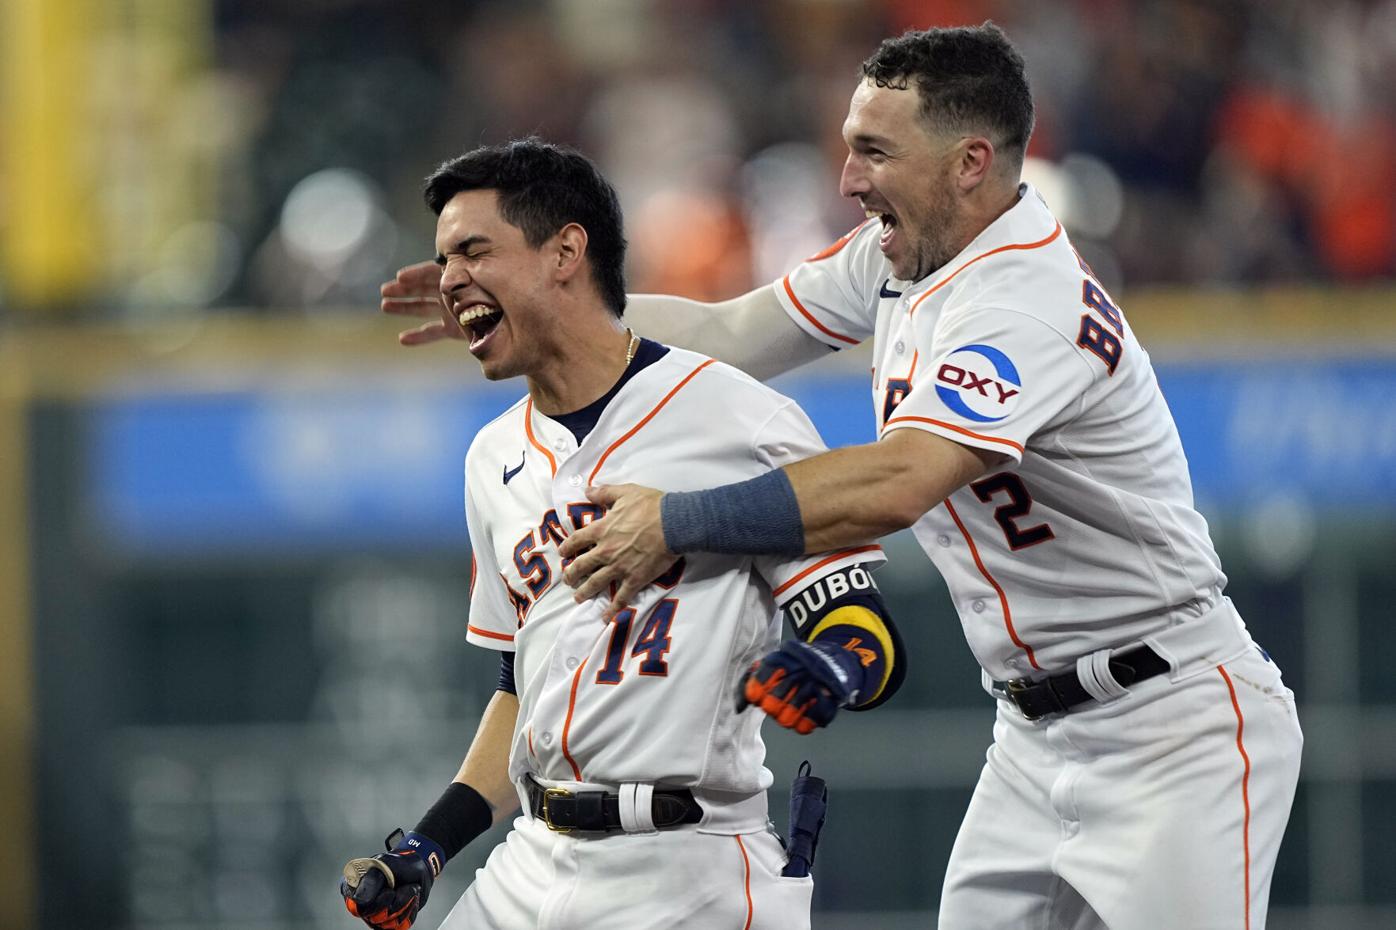 Astros avoid sweep with win over Royals, gain game in AL West over